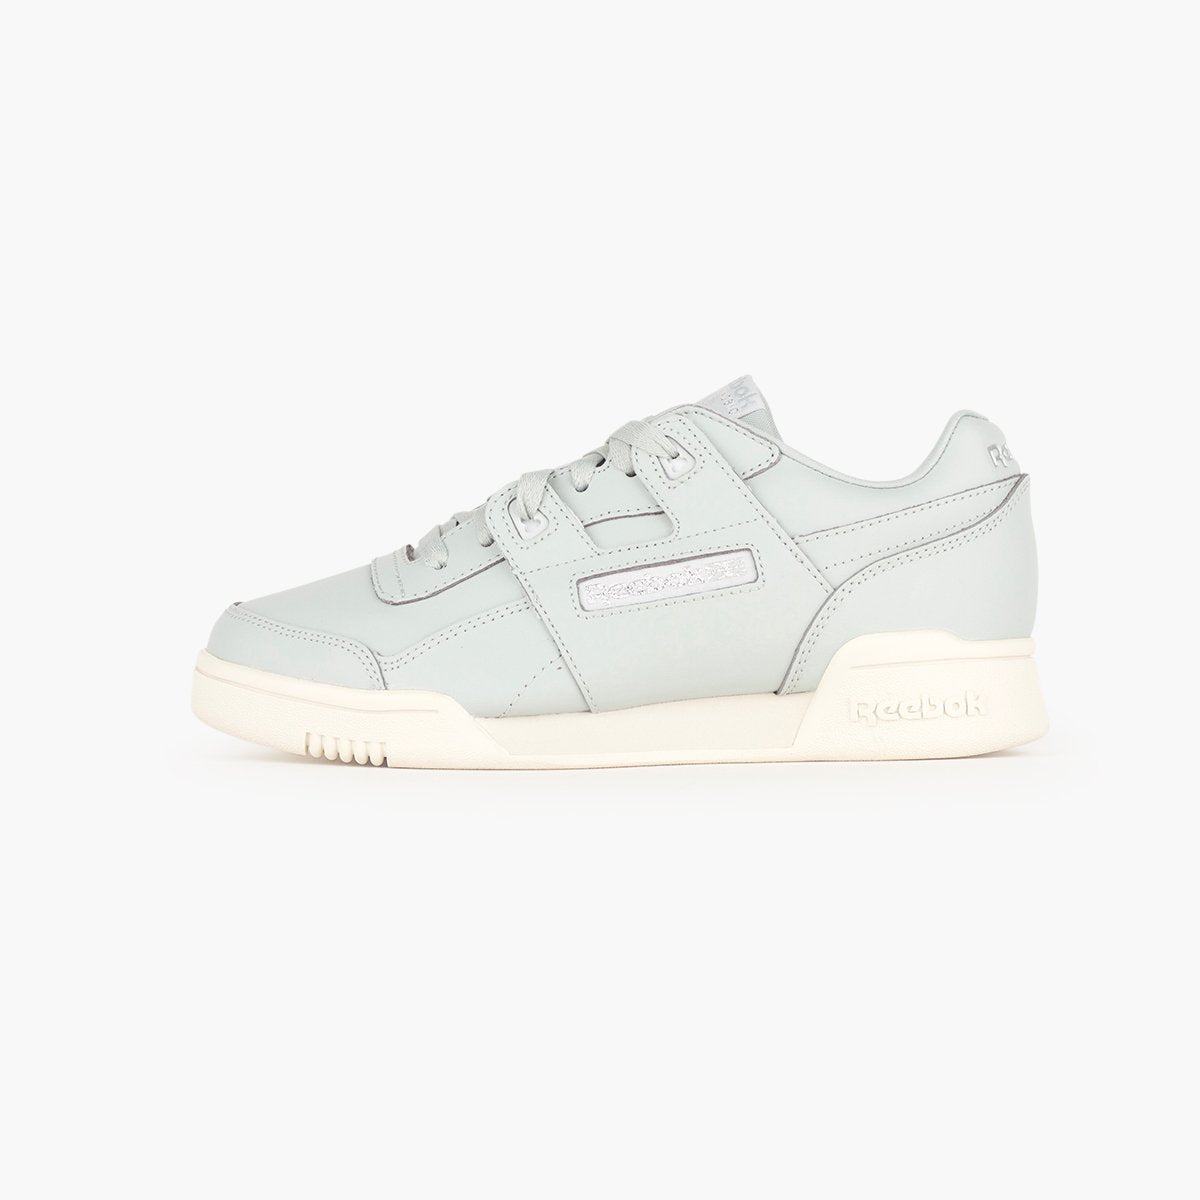 Reebok Workout Lo Plus Womens-SUEDE Store